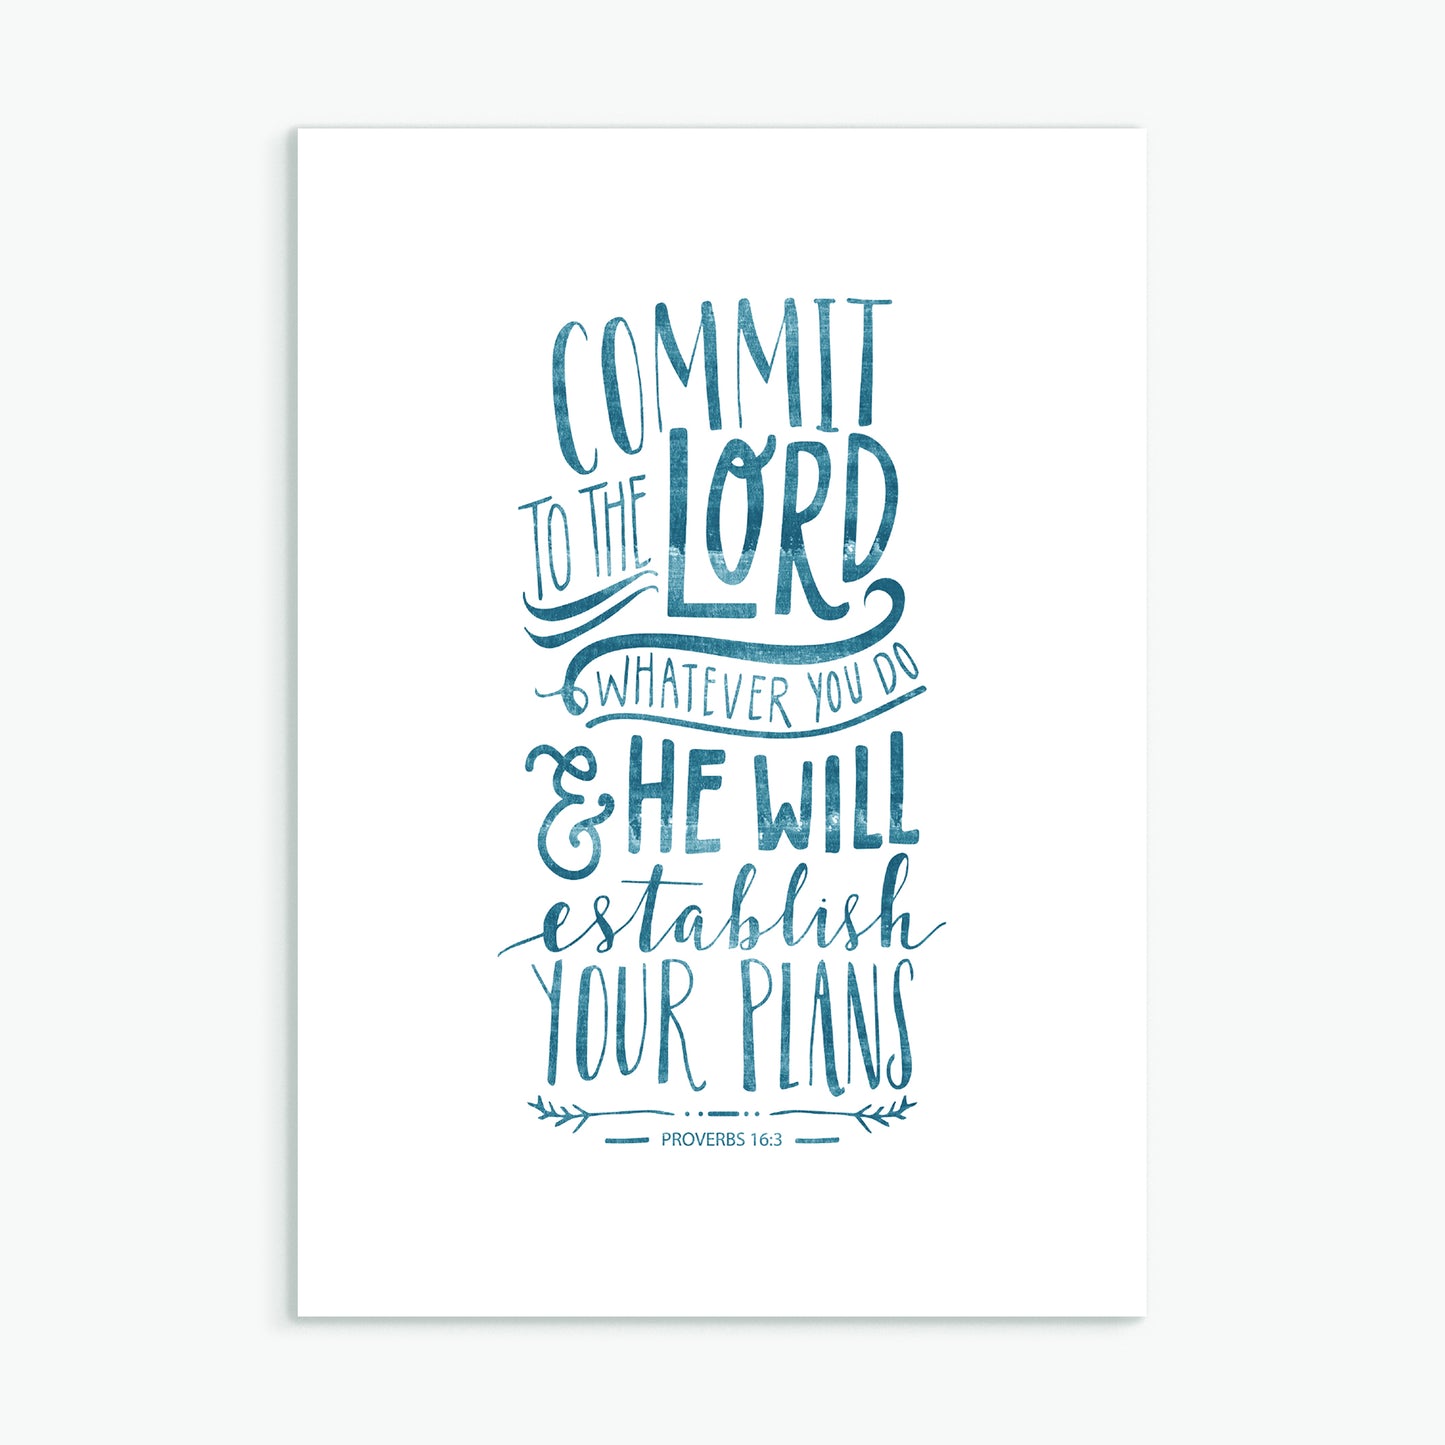 'Commit to the Lord' by Emily Burger - Greeting Card